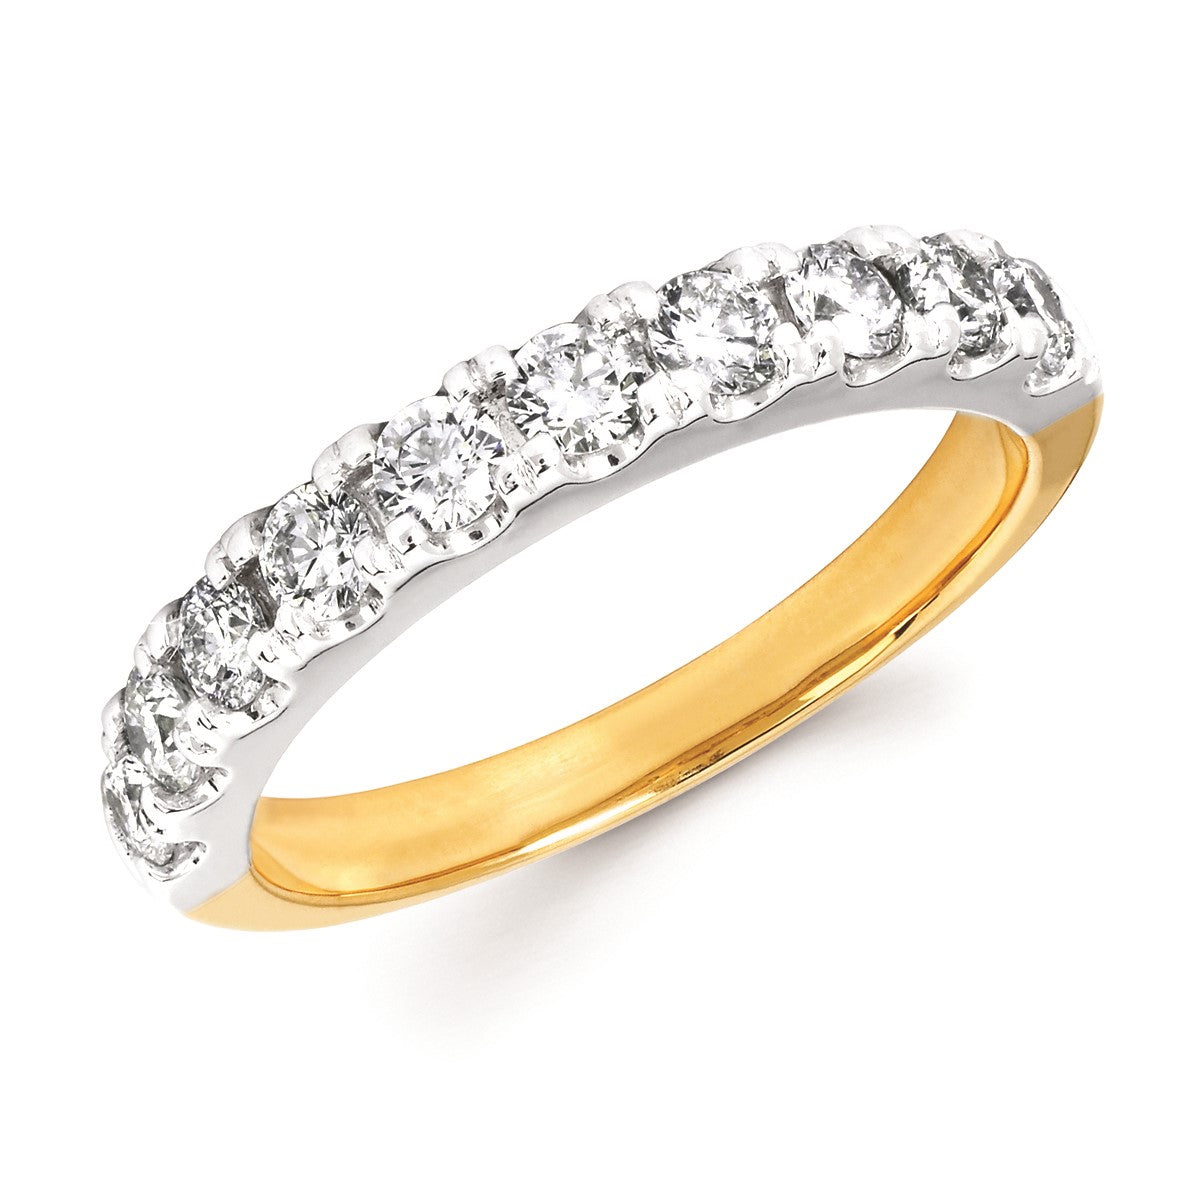 Diamond Anniversary Band in 14k Gold - 0.25, 0.75, 1.00 Carat Total Weights - Talisman Collection Fine Jewelers